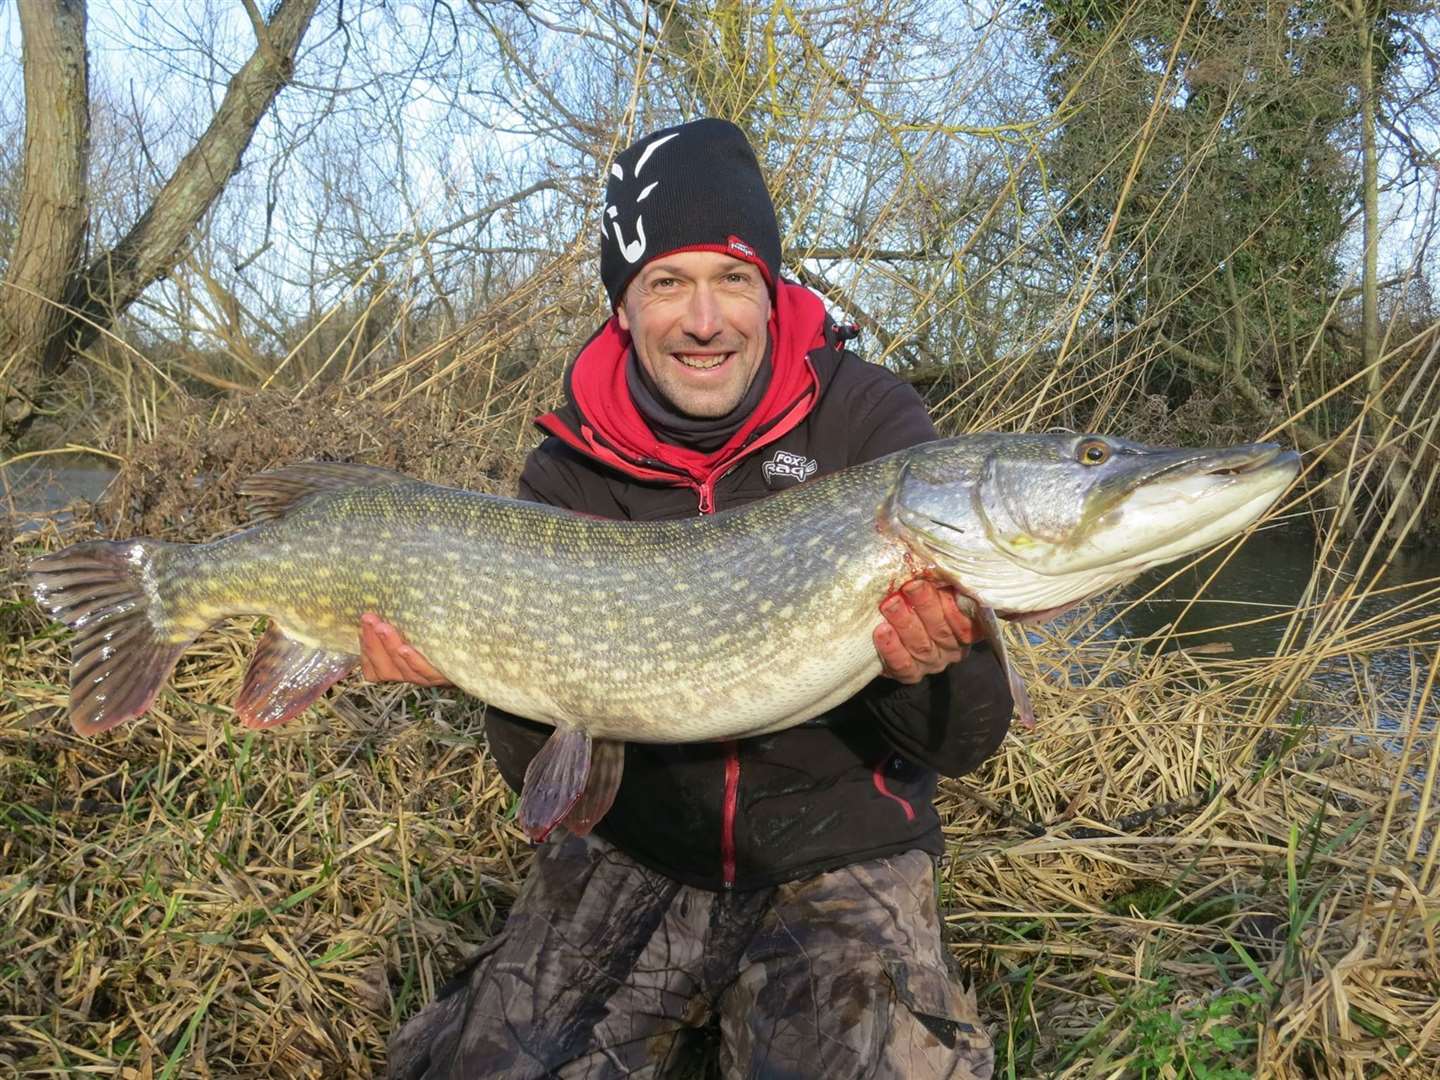 Care must be taken when catching pike